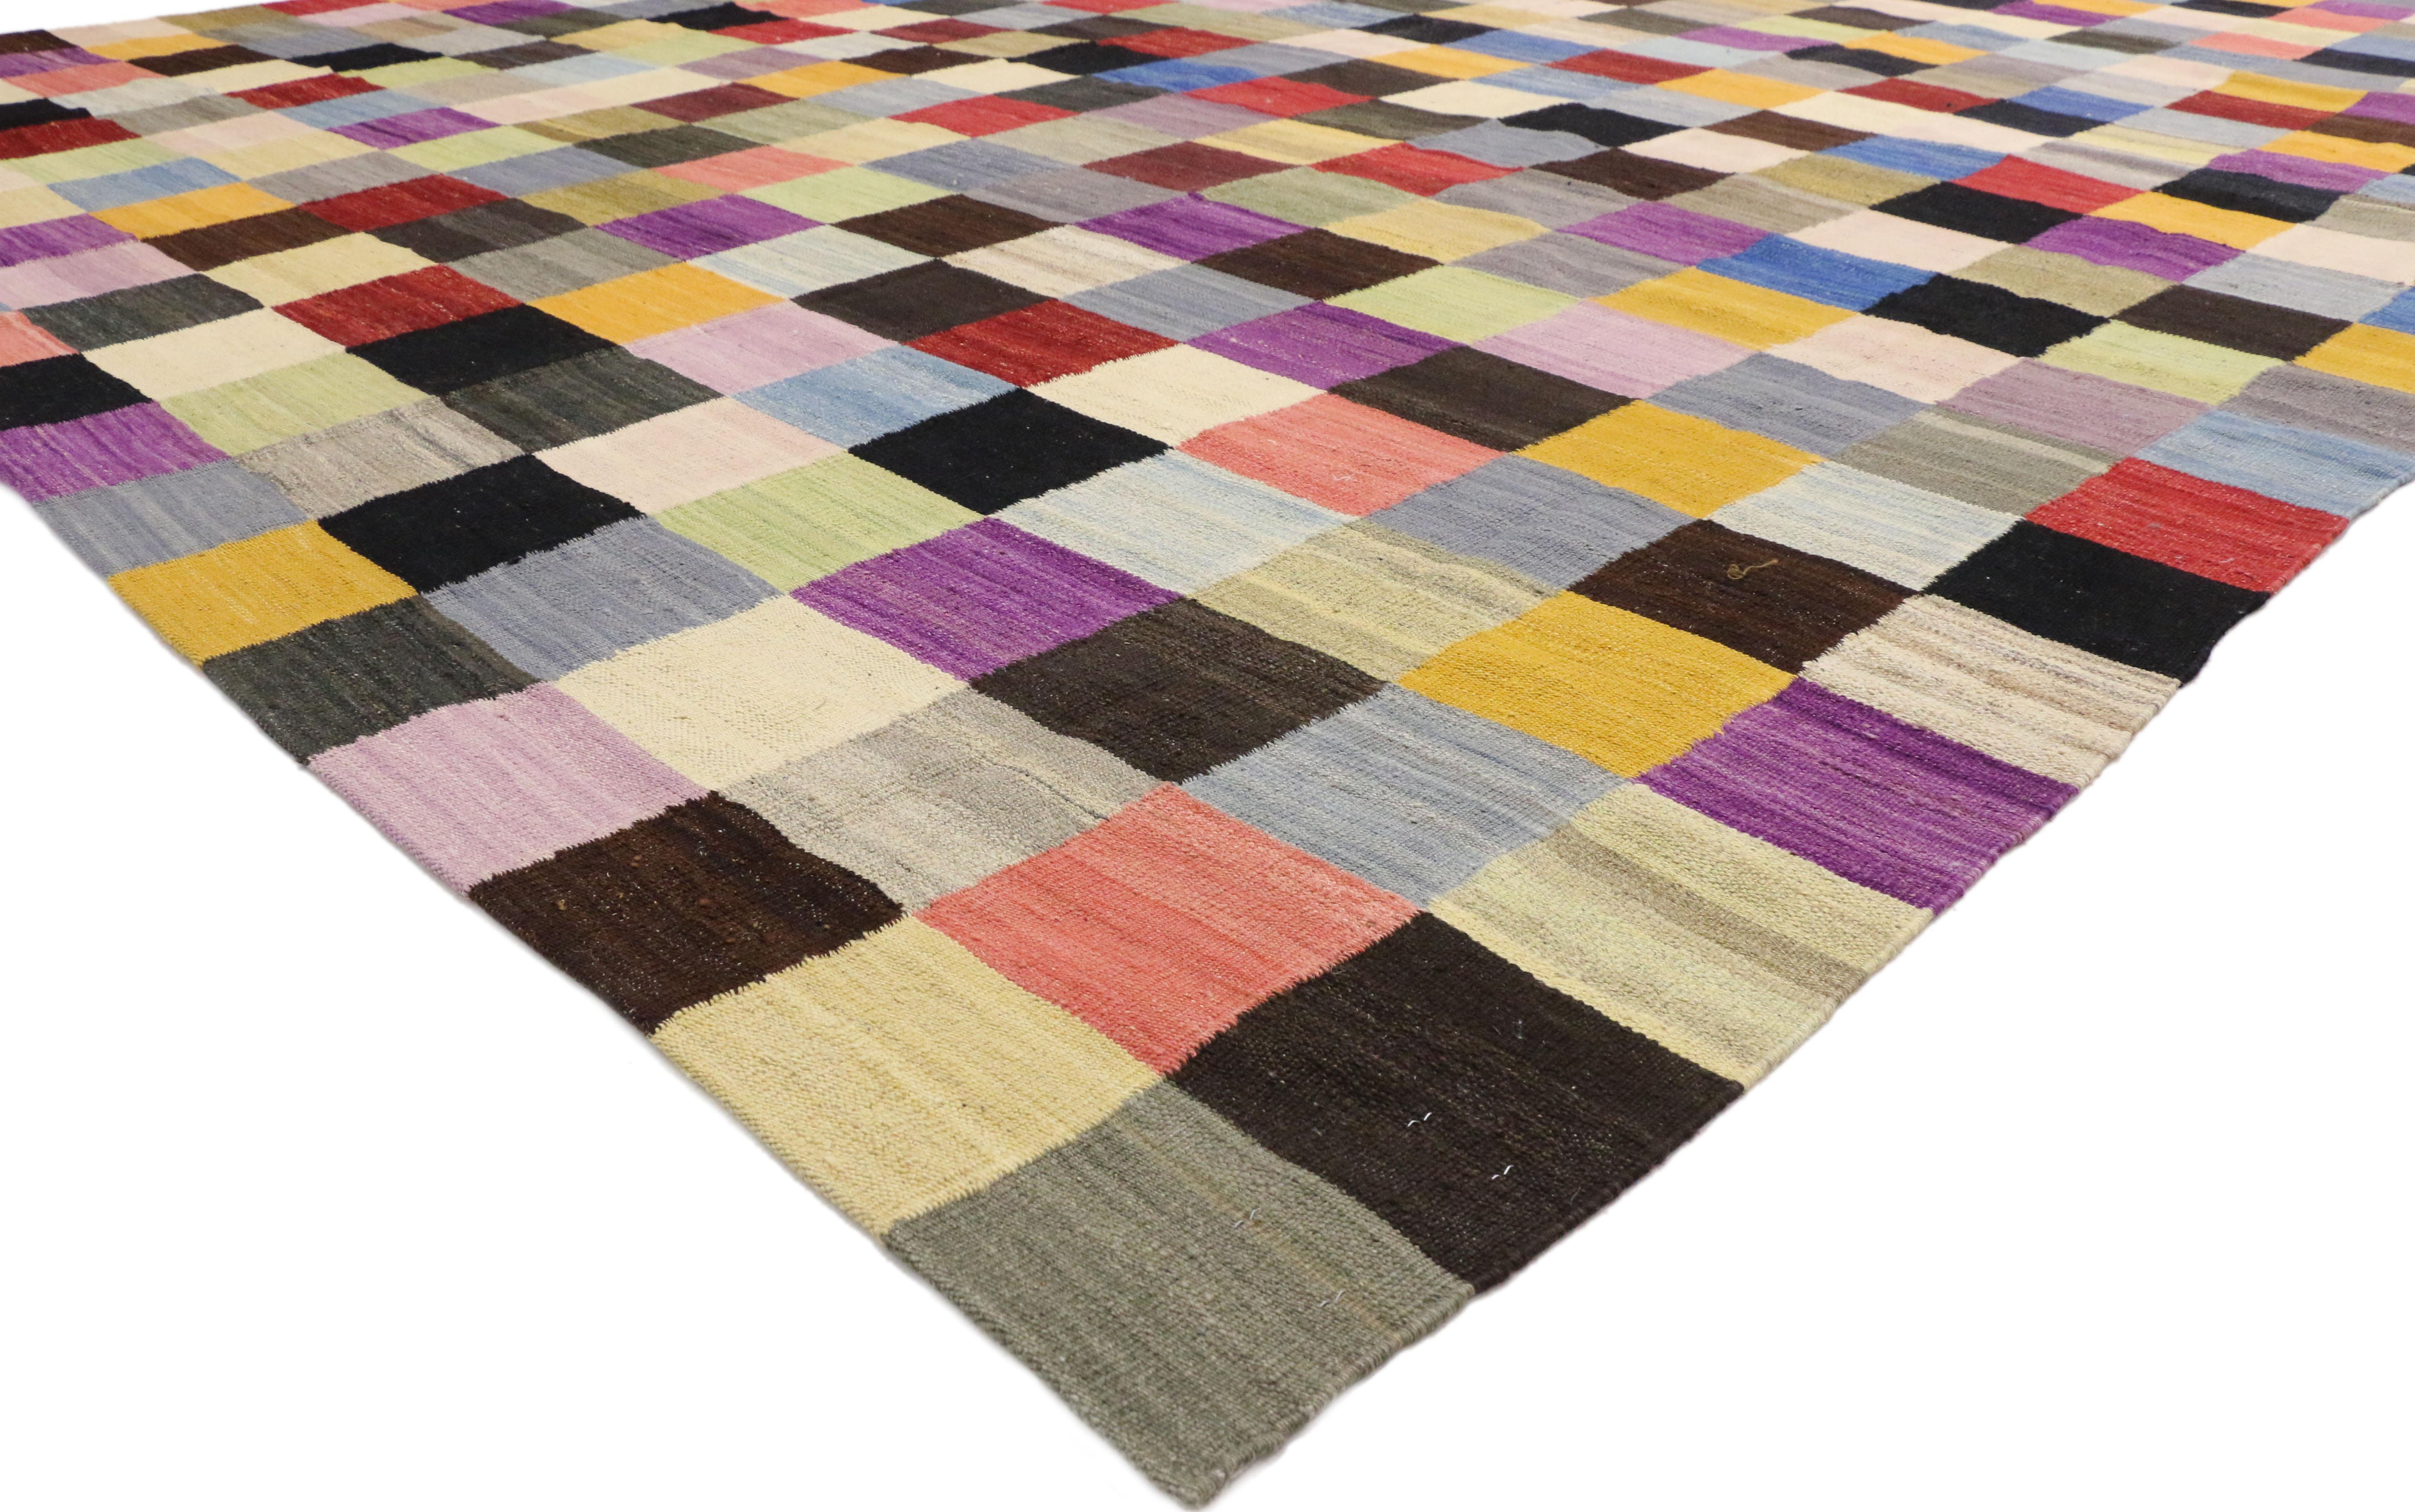 80094 Vintage Checkered Afghan Kilim Rug, 09'07 x 12'08. This handwoven wool vintage Afghan Kilim rug showcases an all-over checkered grid pattern, a motif that echoes the bold geometries and dynamic compositions of Cubist art. Composed of small